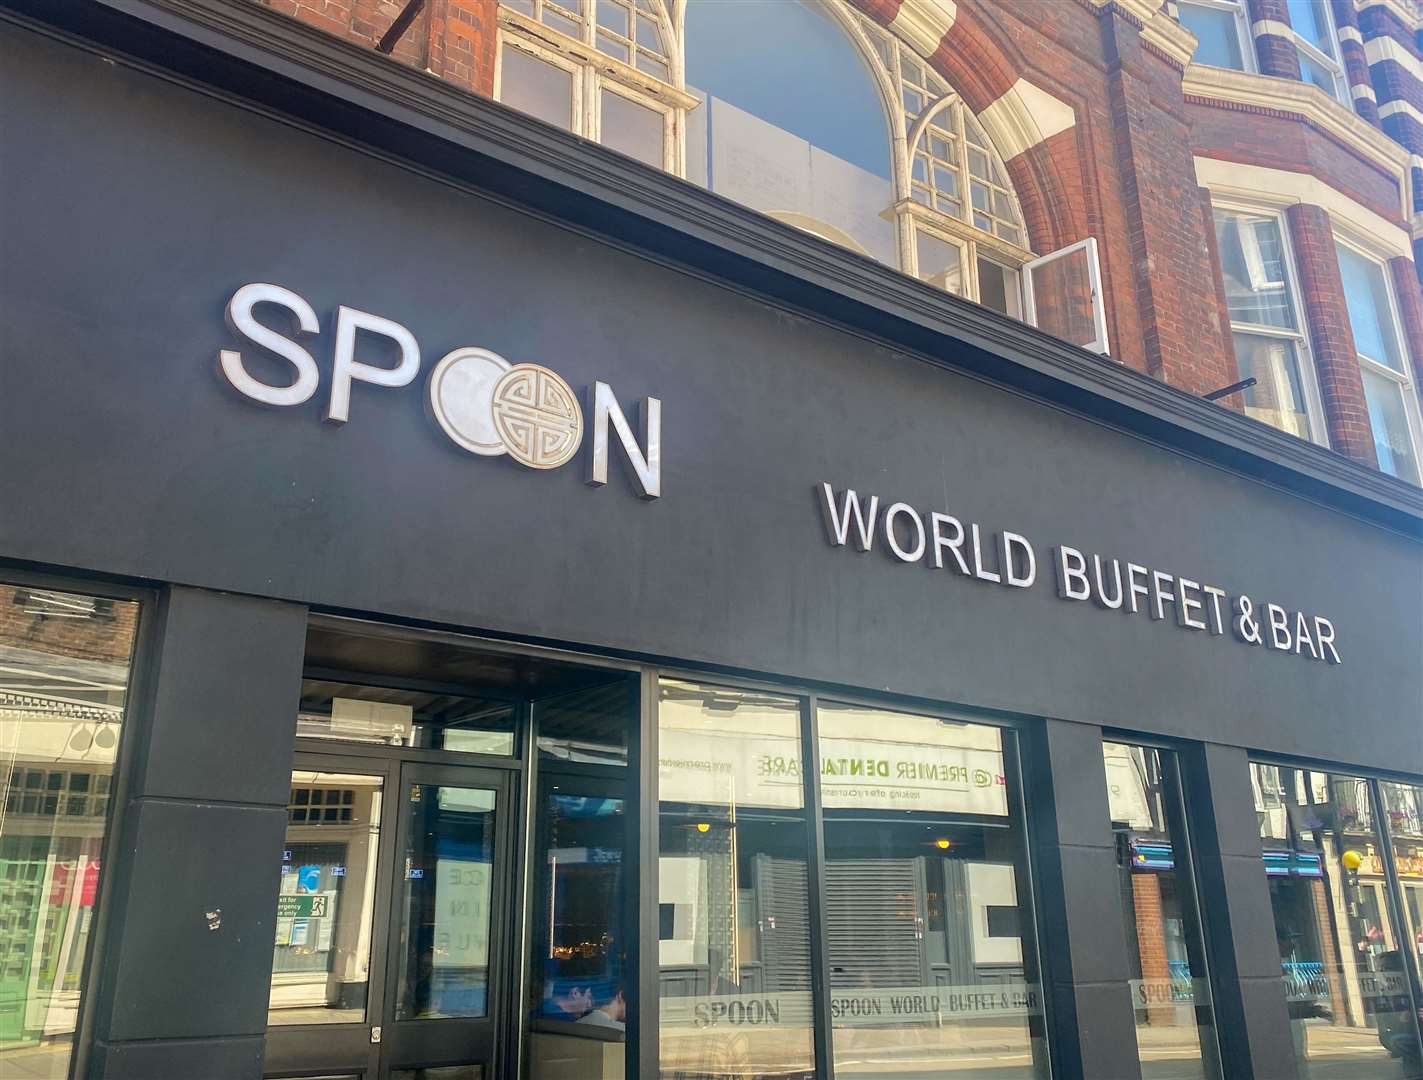 We braved lunch at Spoon World Buffet despite the terrible online reviews - thankfully, it wasn't as bad as we expected. Picture: Sam Lawrie